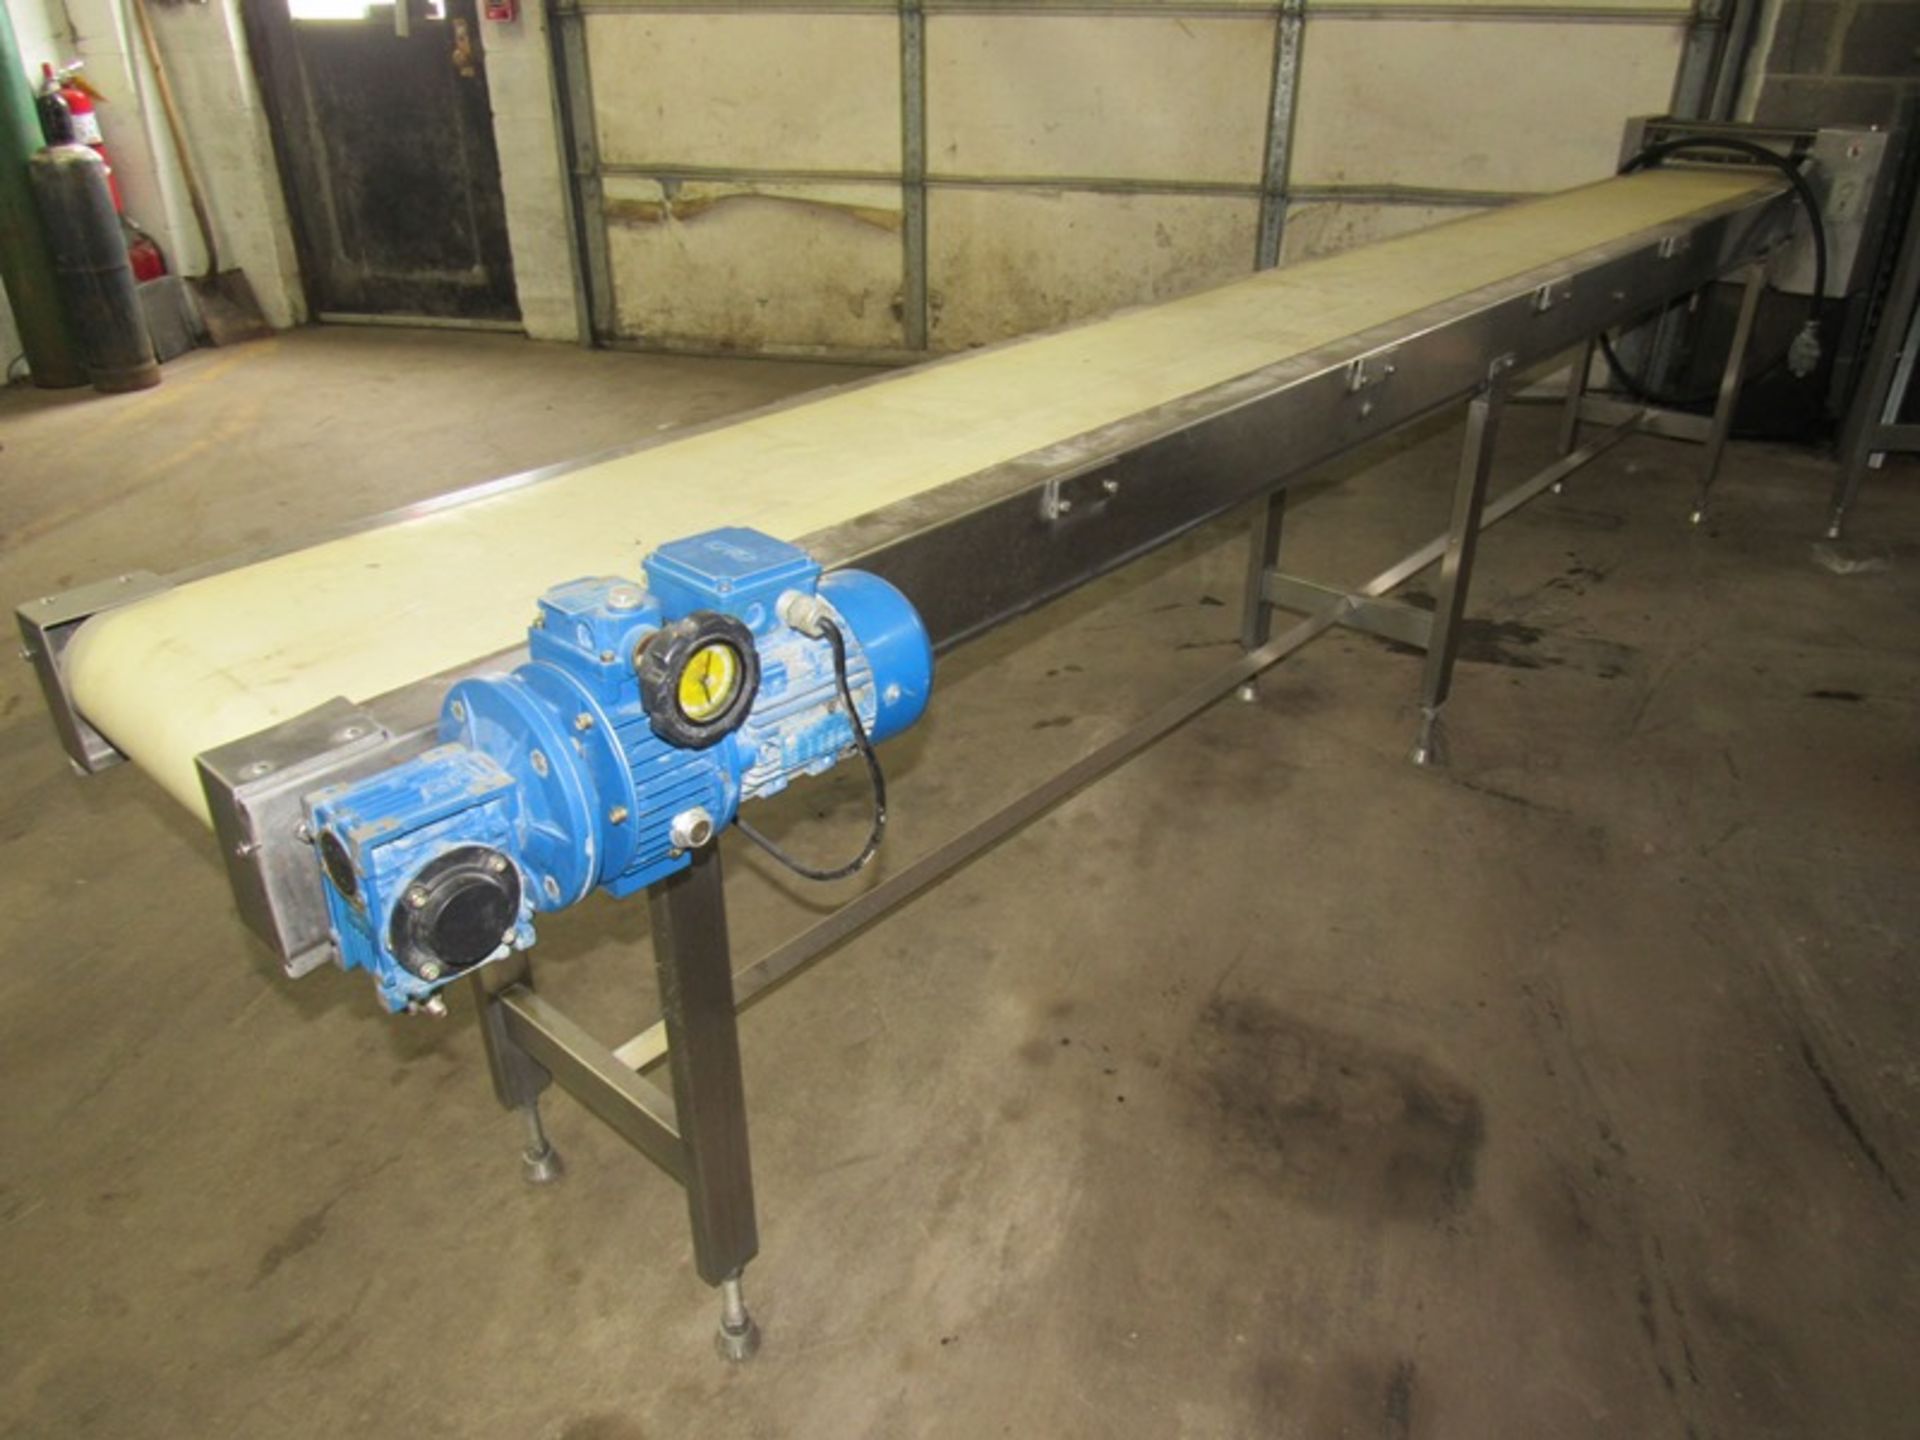 Stainless Steel Folding Conveyor with guillotine cutter 12" W X 14' L, 220 volts